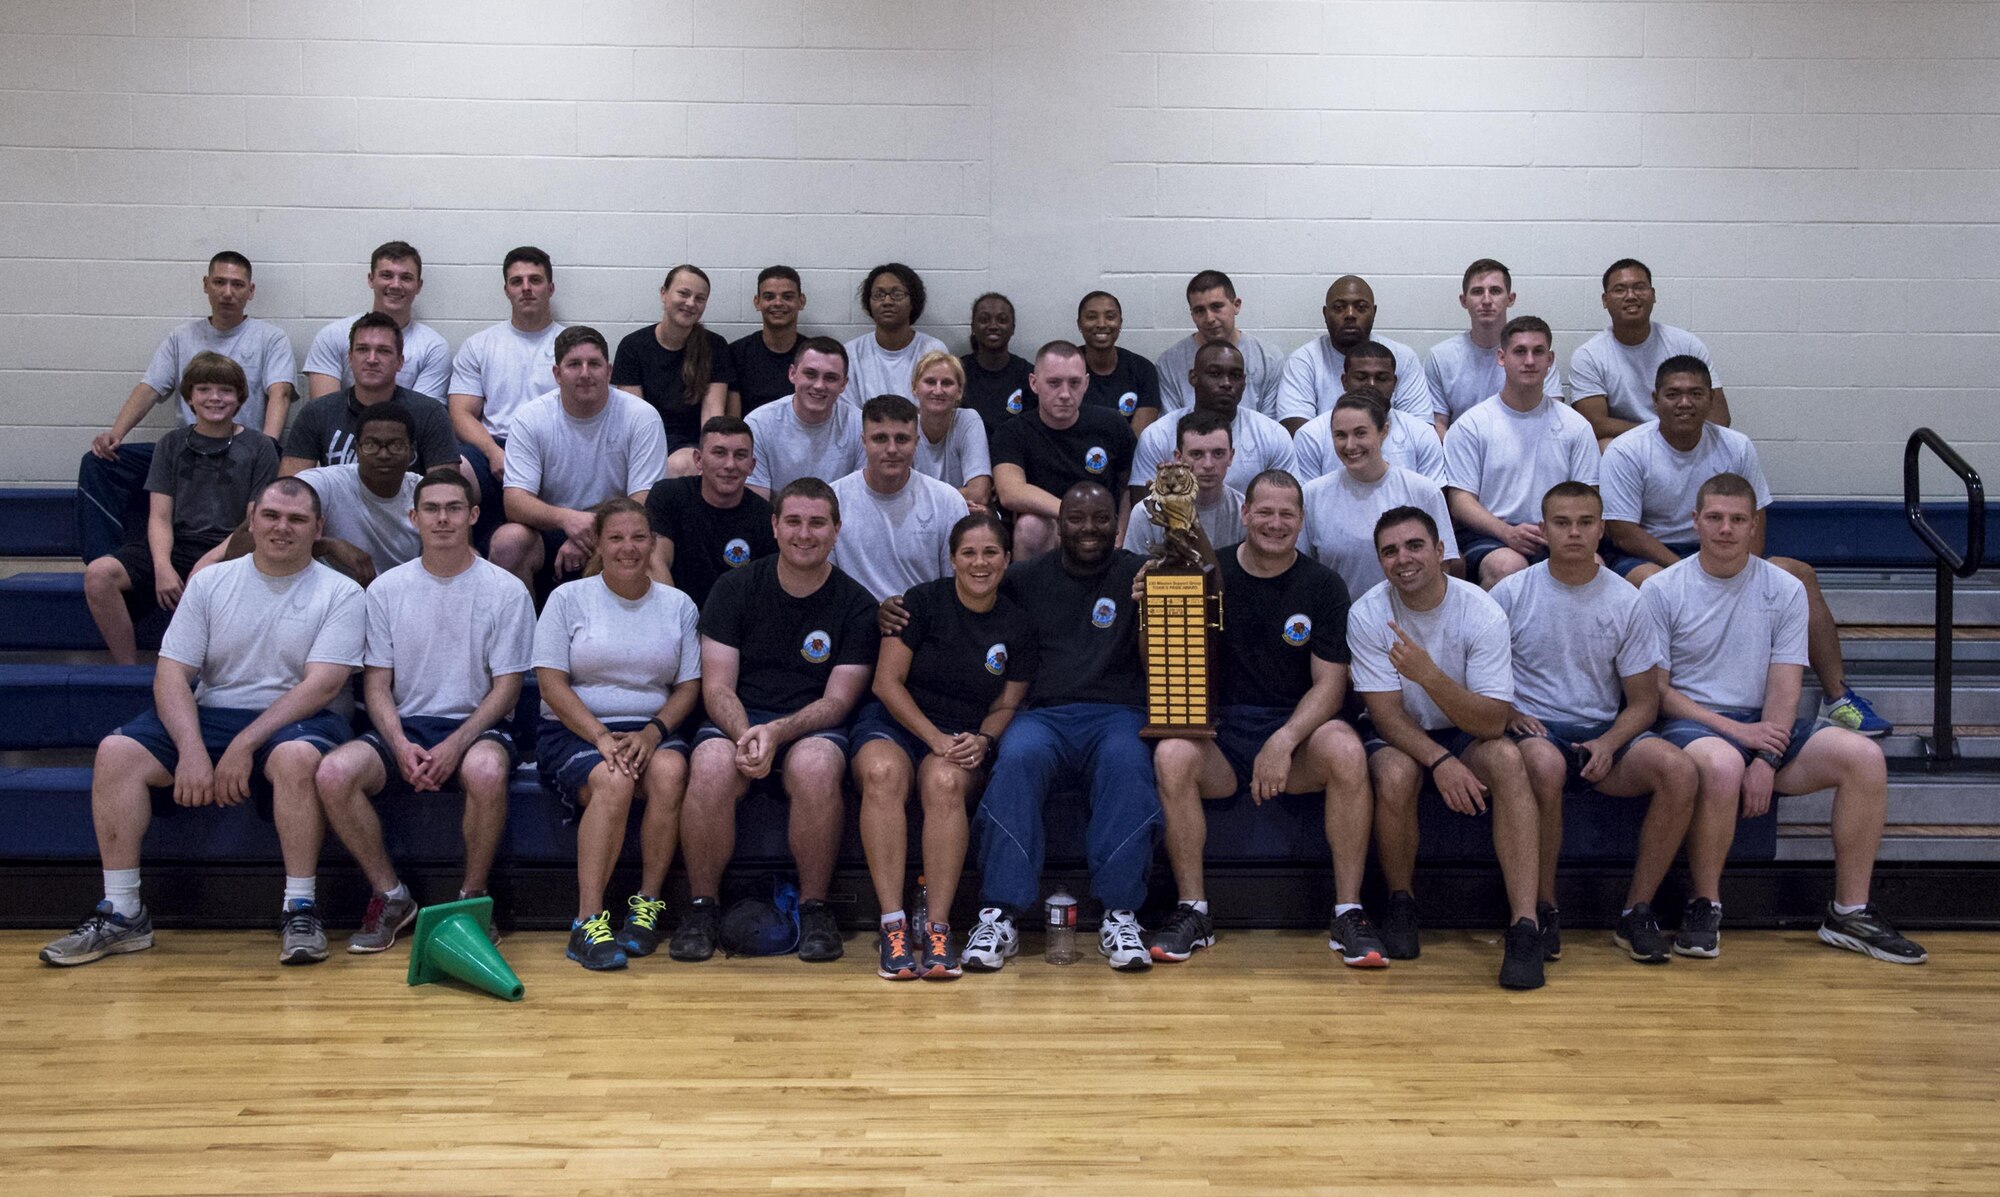 U.S. Air Force Airmen from the 23d Communications Squadron pose for a photo during Sports Day, June 17, 2016, at Moody Air Force Base, Ga. This is the sixth year the 23d Mission Support Group hosted a sports day and the second year that the 23d CS has won. (U.S. Air Force photo by Airman 1st Class Janiqua P. Robinson/Released)